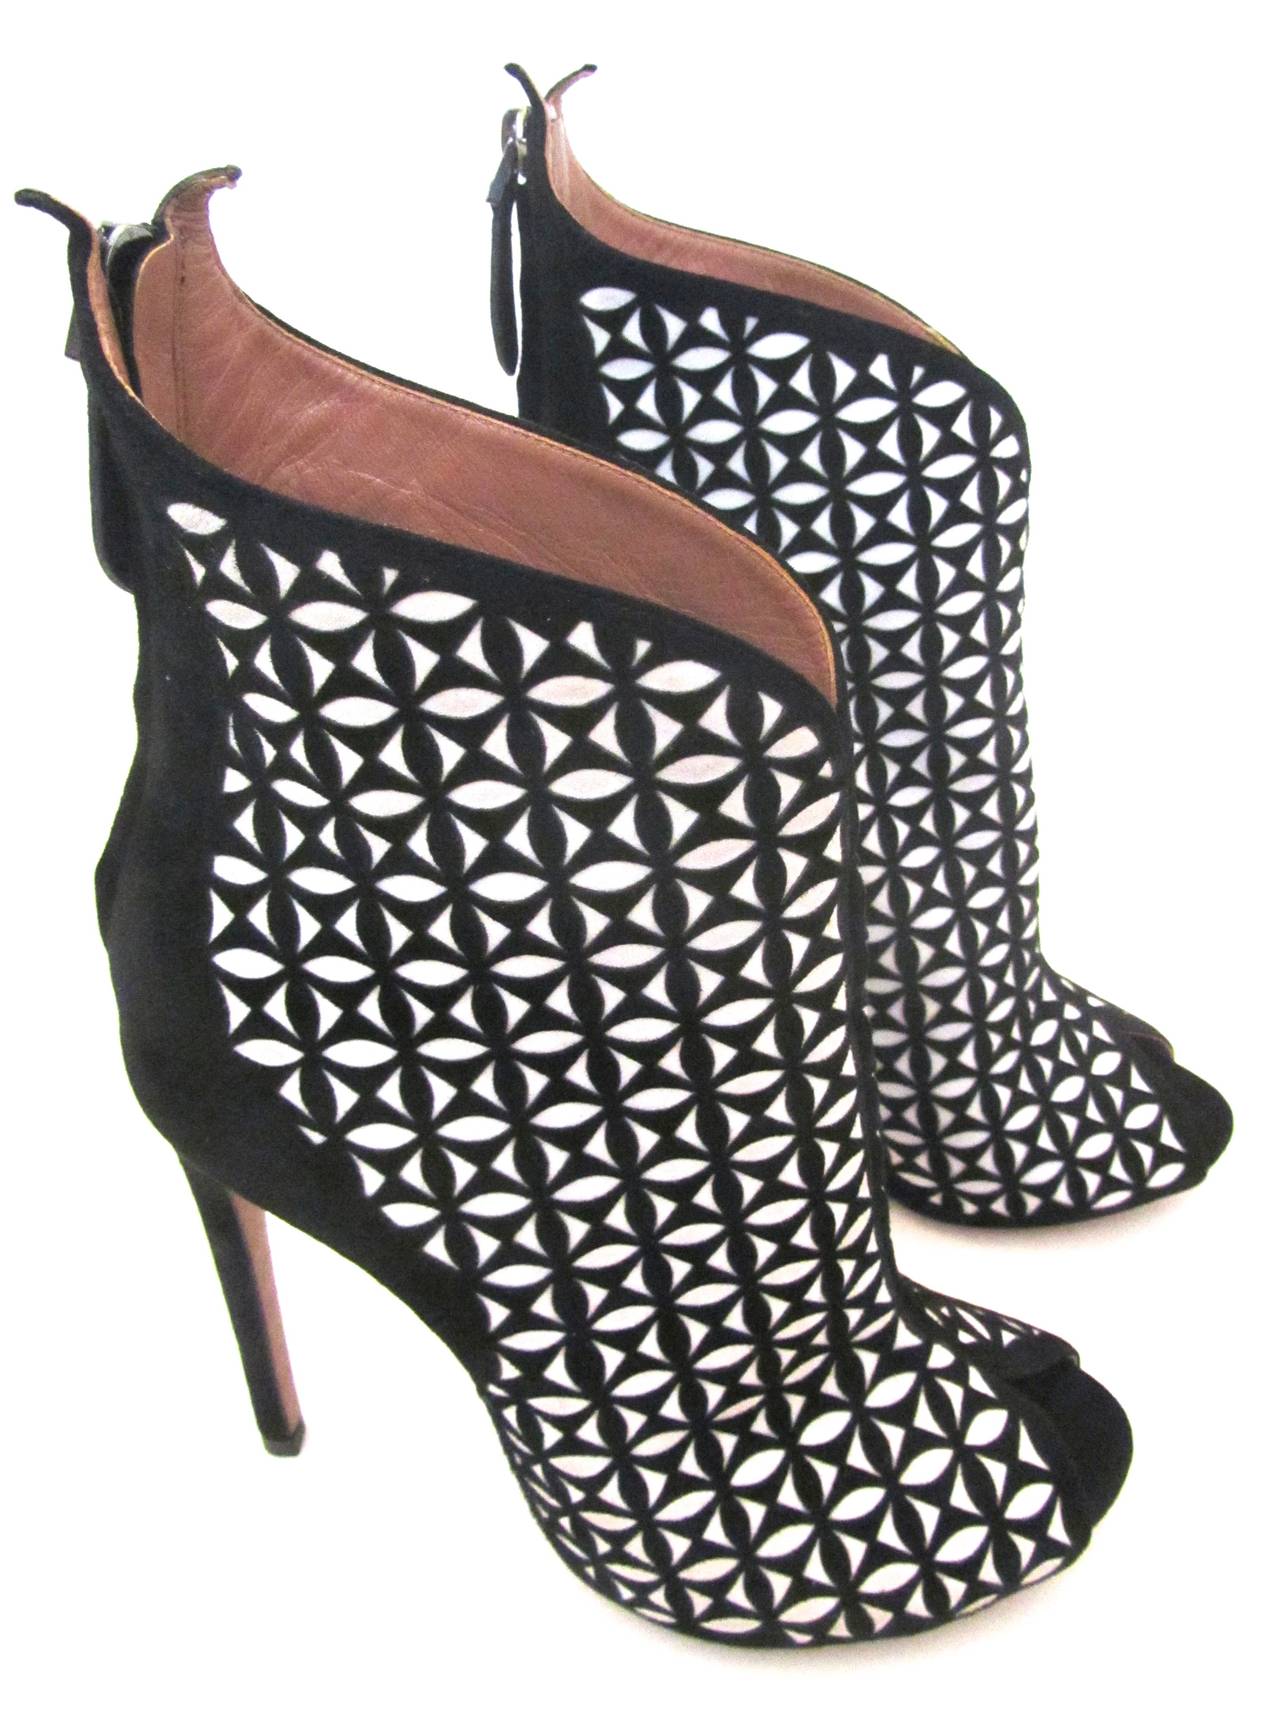 New Alaia Open Toed High Heel Boots - 37 - Black and White Suede In New Condition For Sale In Boca Raton, FL